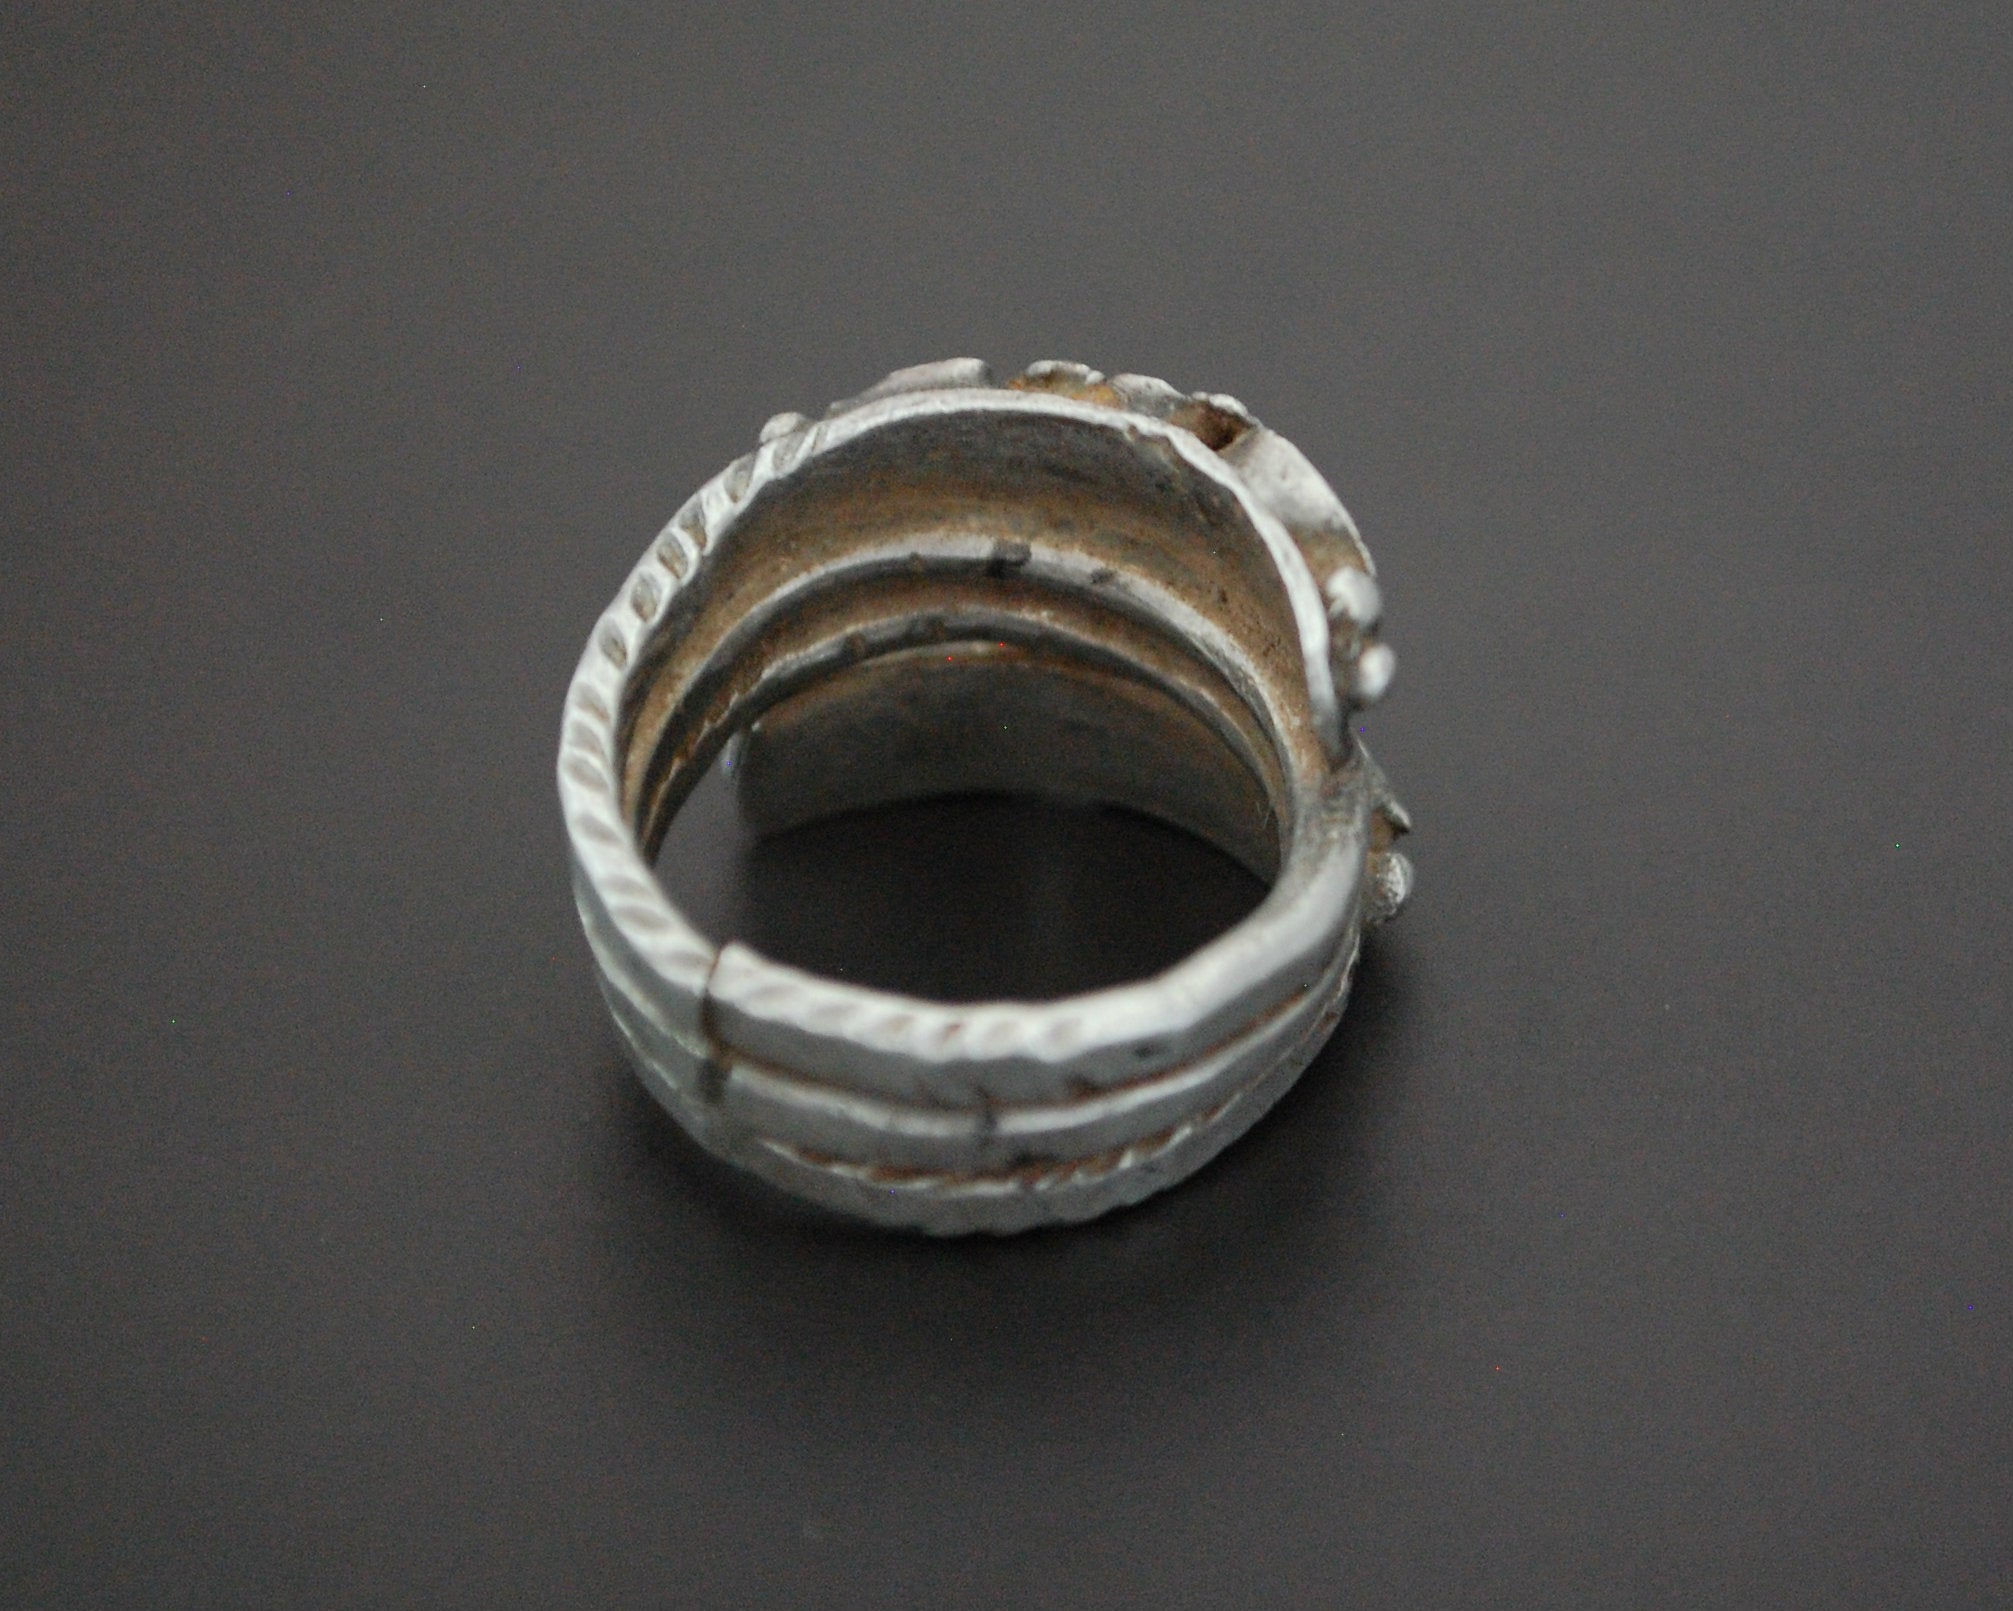 Ethnic Coil Ring from Afghanistan - Size 7